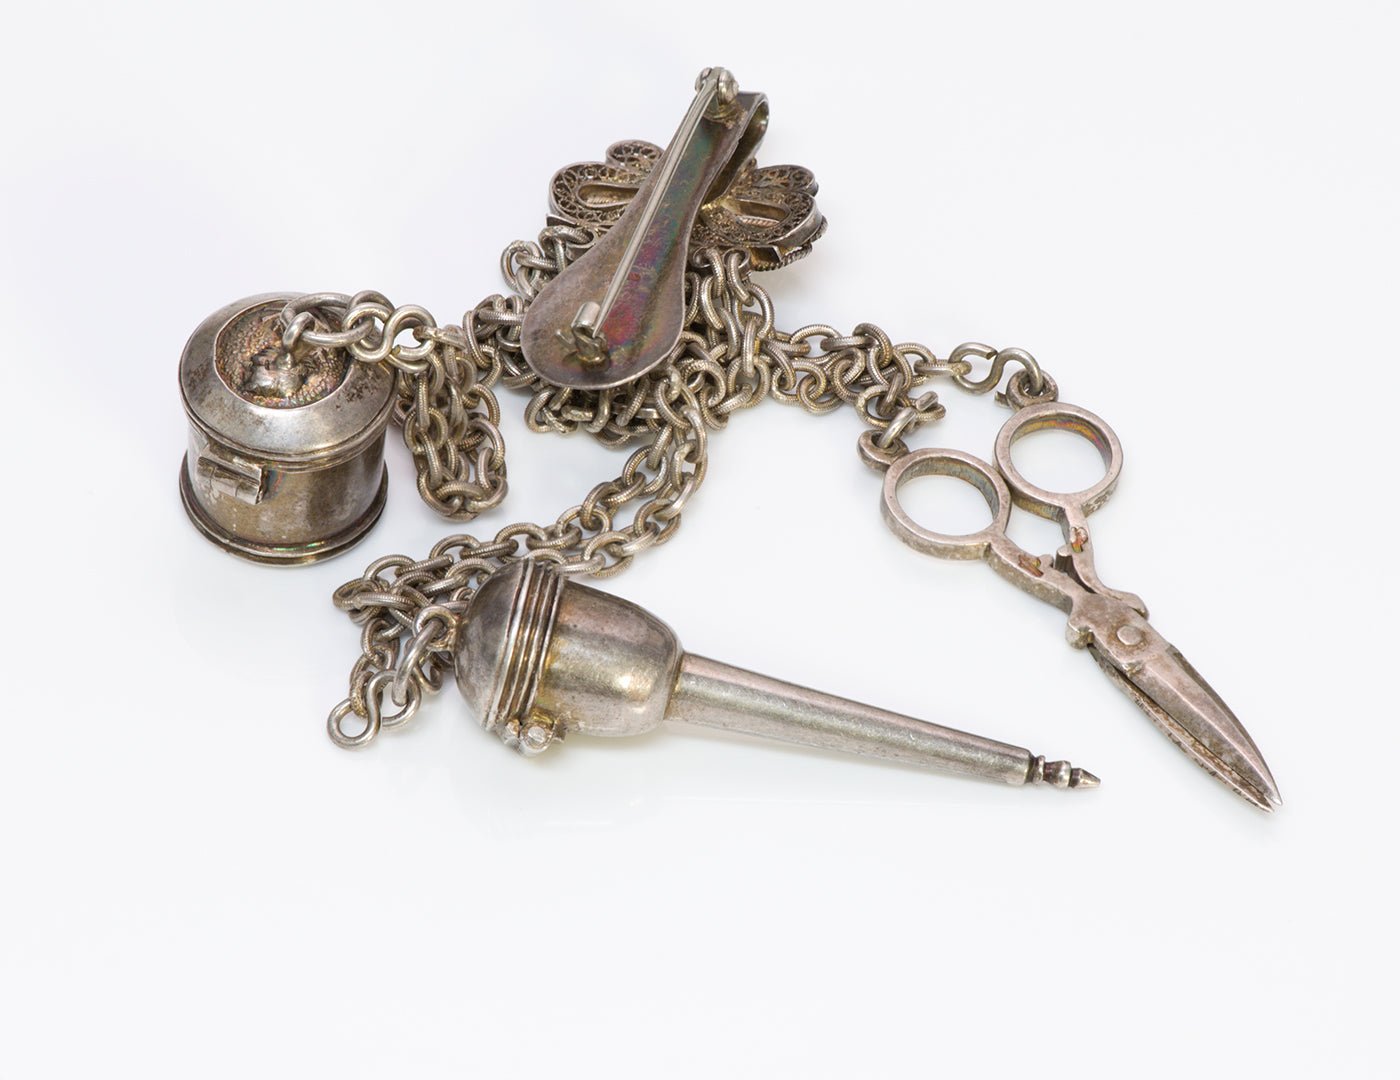 Antique Miniature Silver Chatelaine Sawing Items - DSF Antique Jewelry